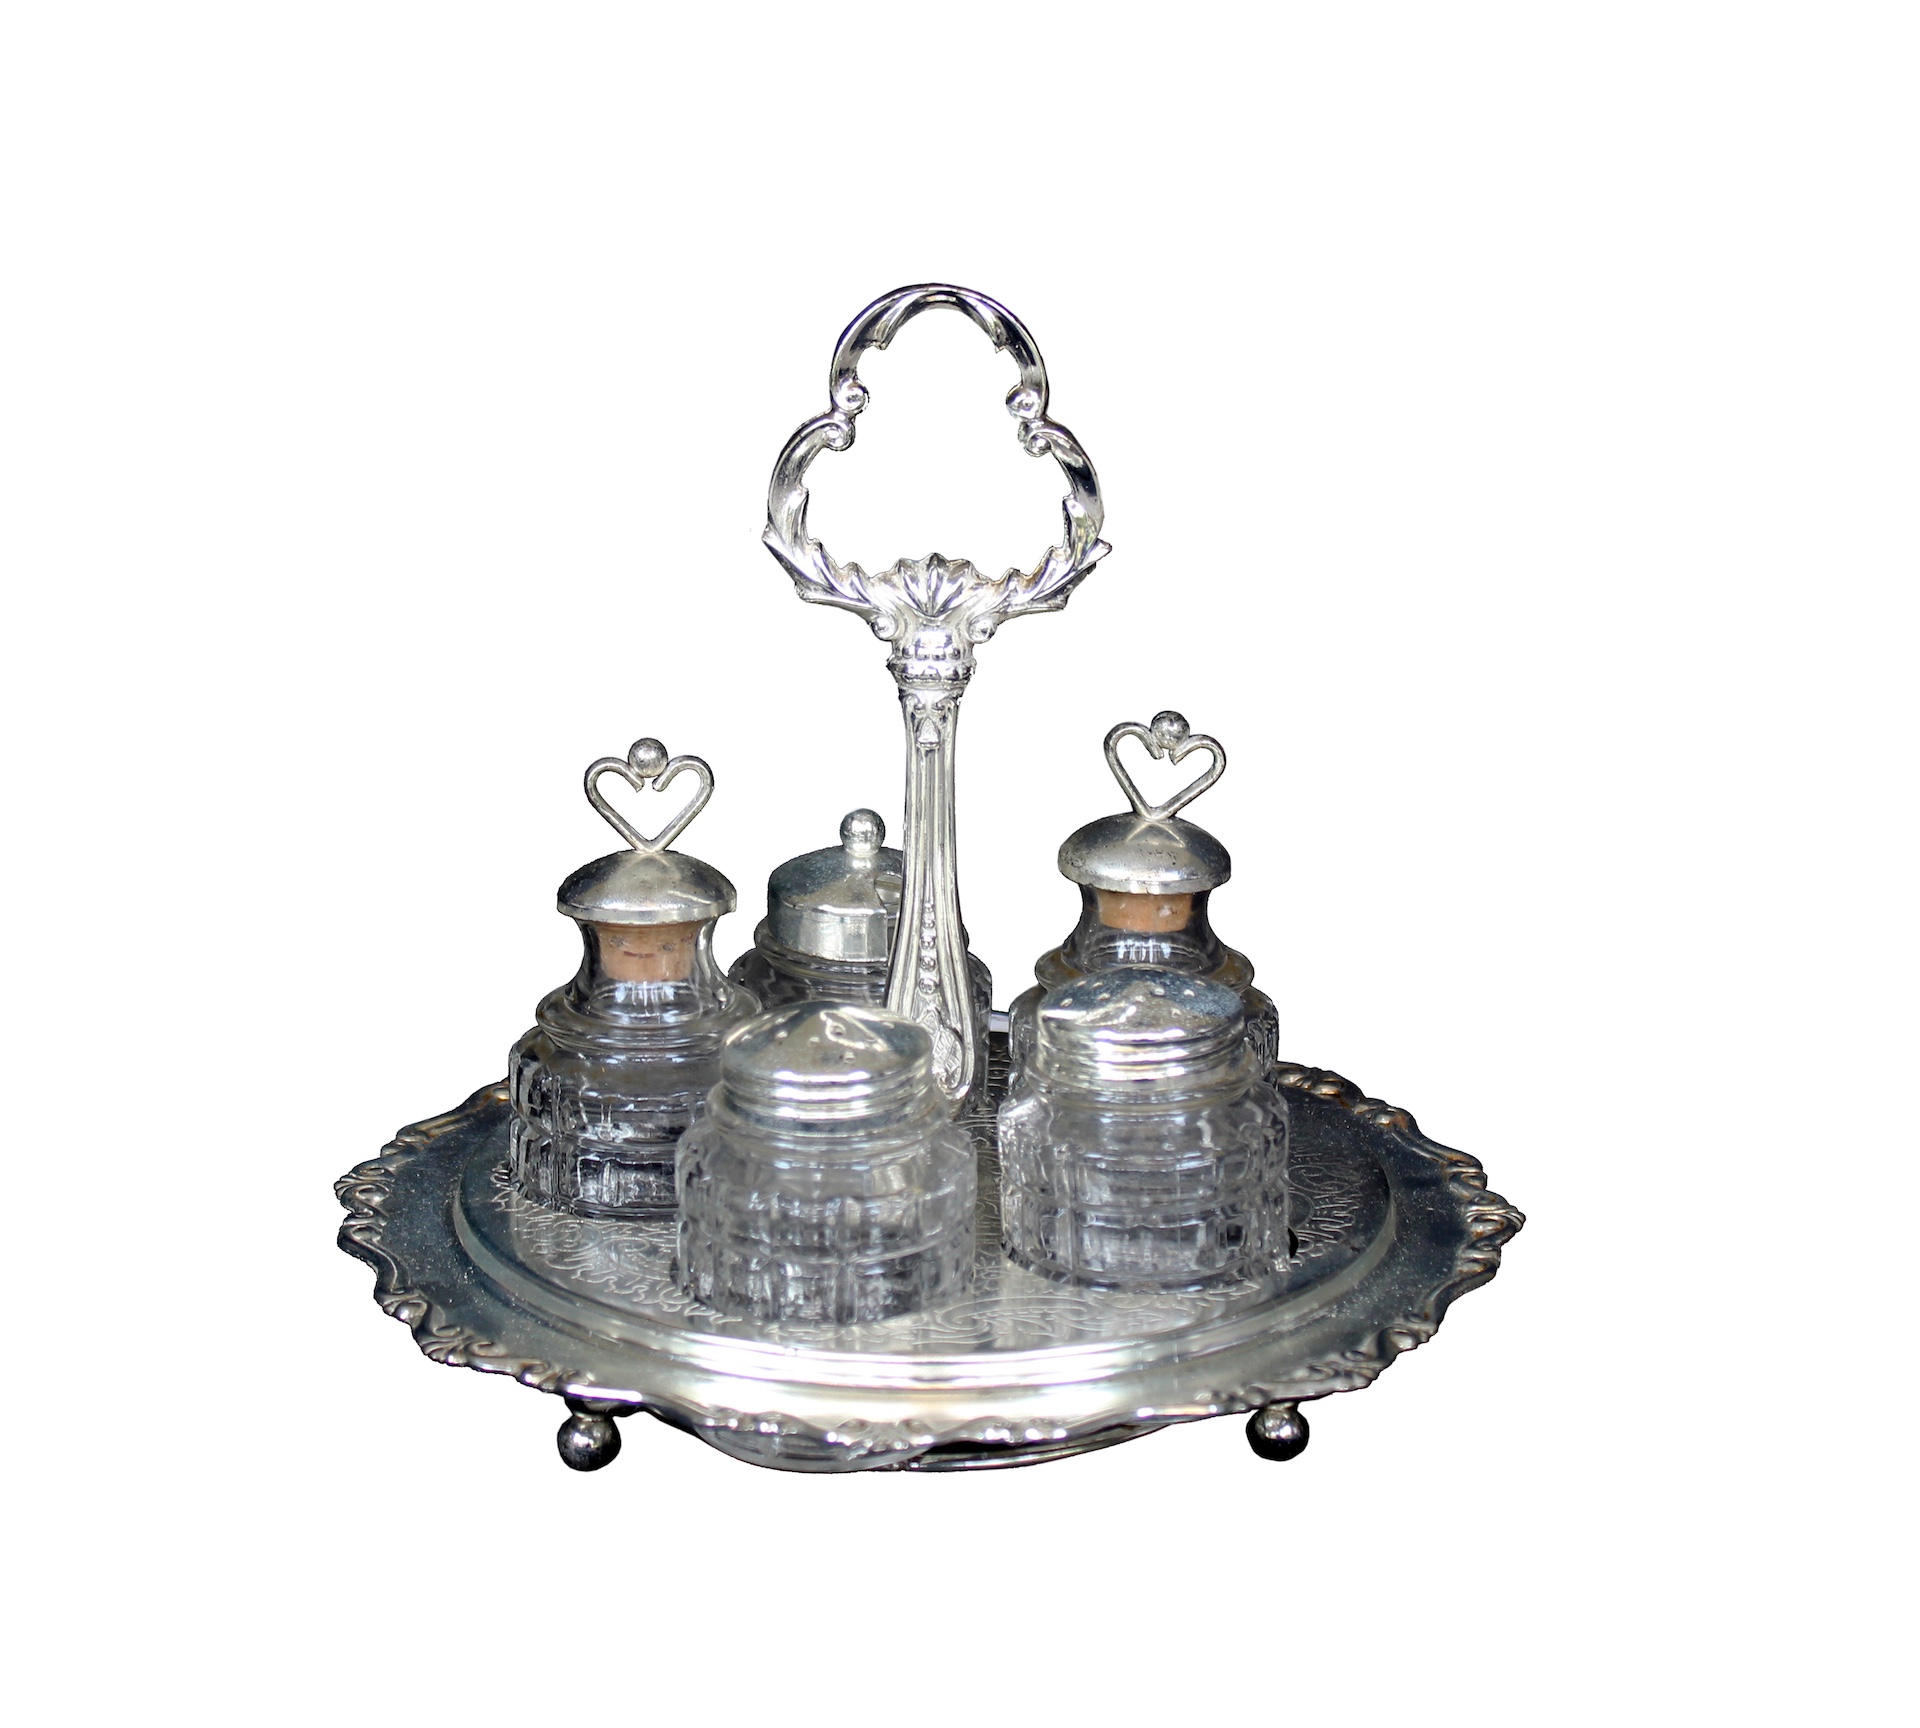 A silver plated condiment set with tray